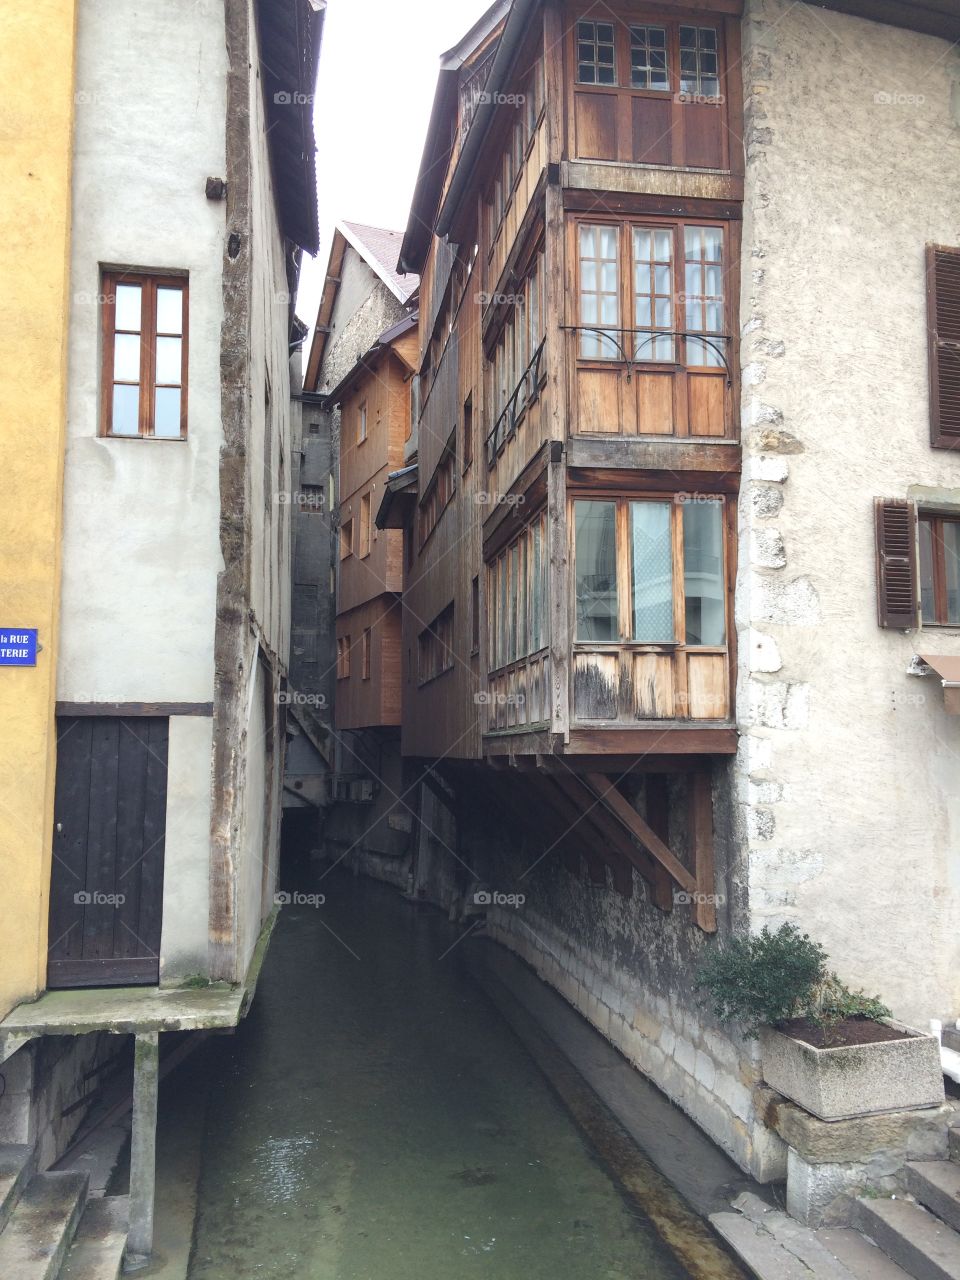 Canals in Annecy, France.